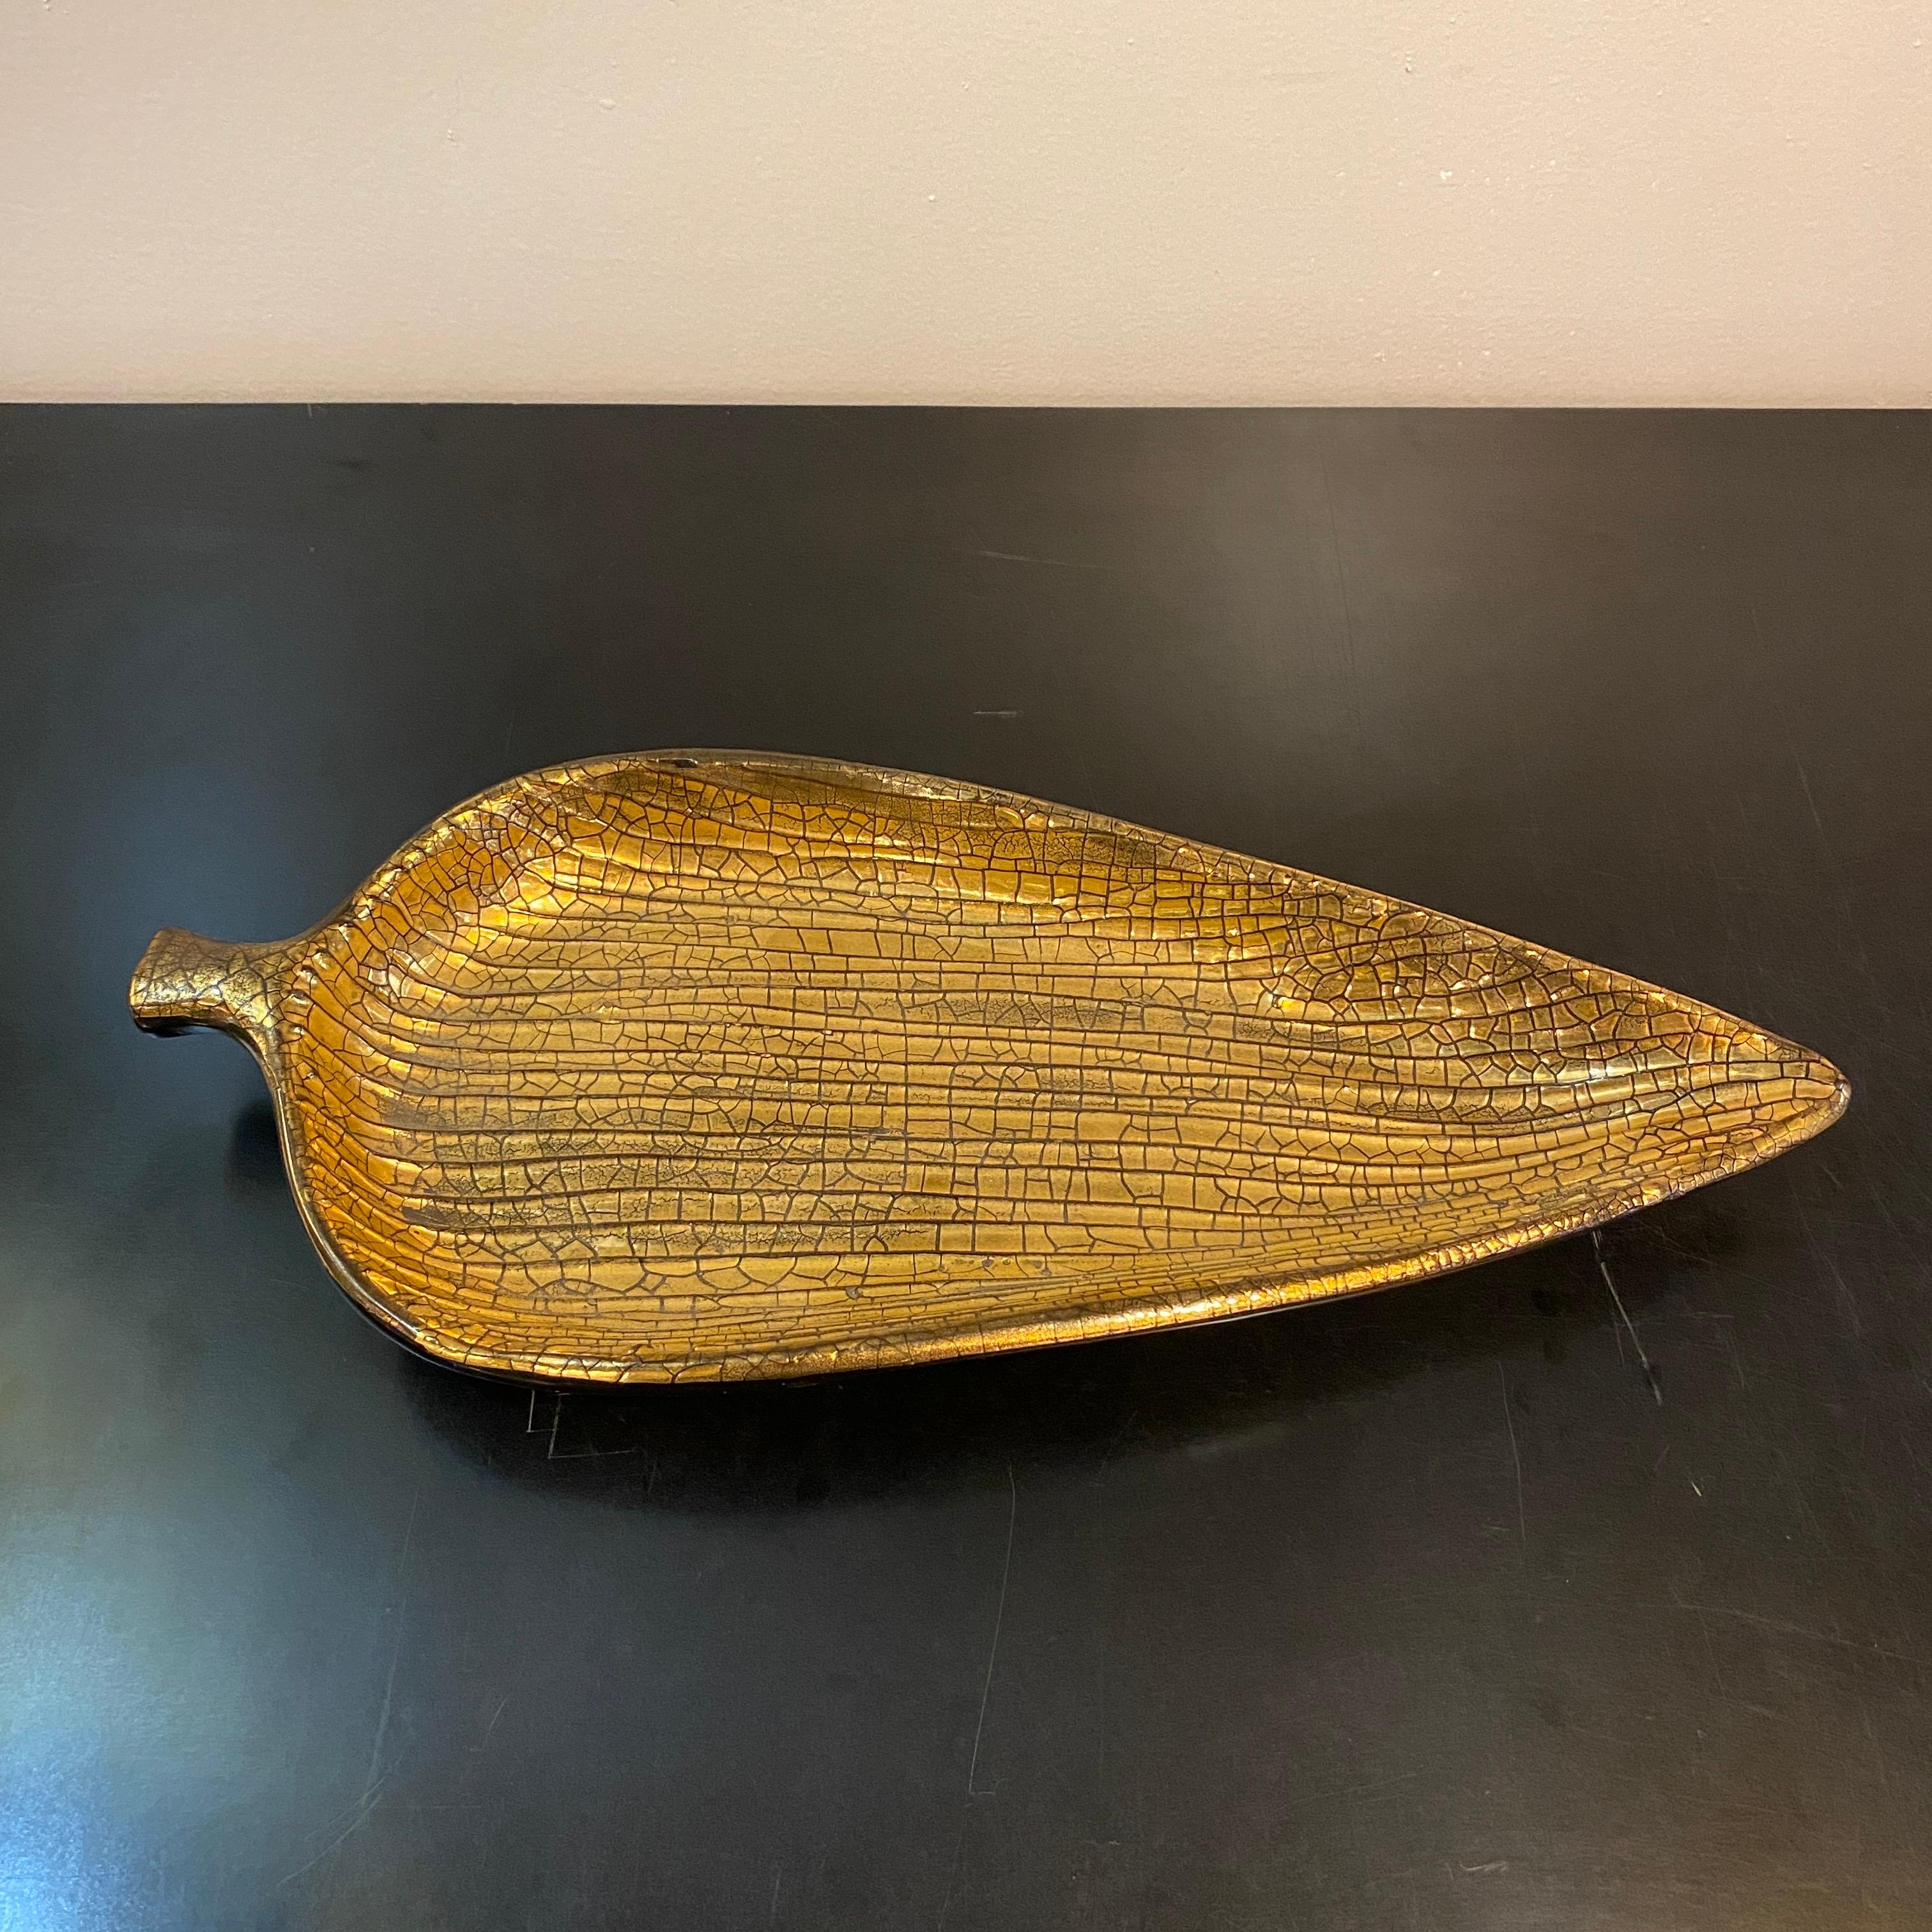 Italian, mid-century modern, art pottery, leaf-shaped tray or dish with gilt crackle textured surface and glazed black underside. A glamourous addition to any surface. Marked Italy.